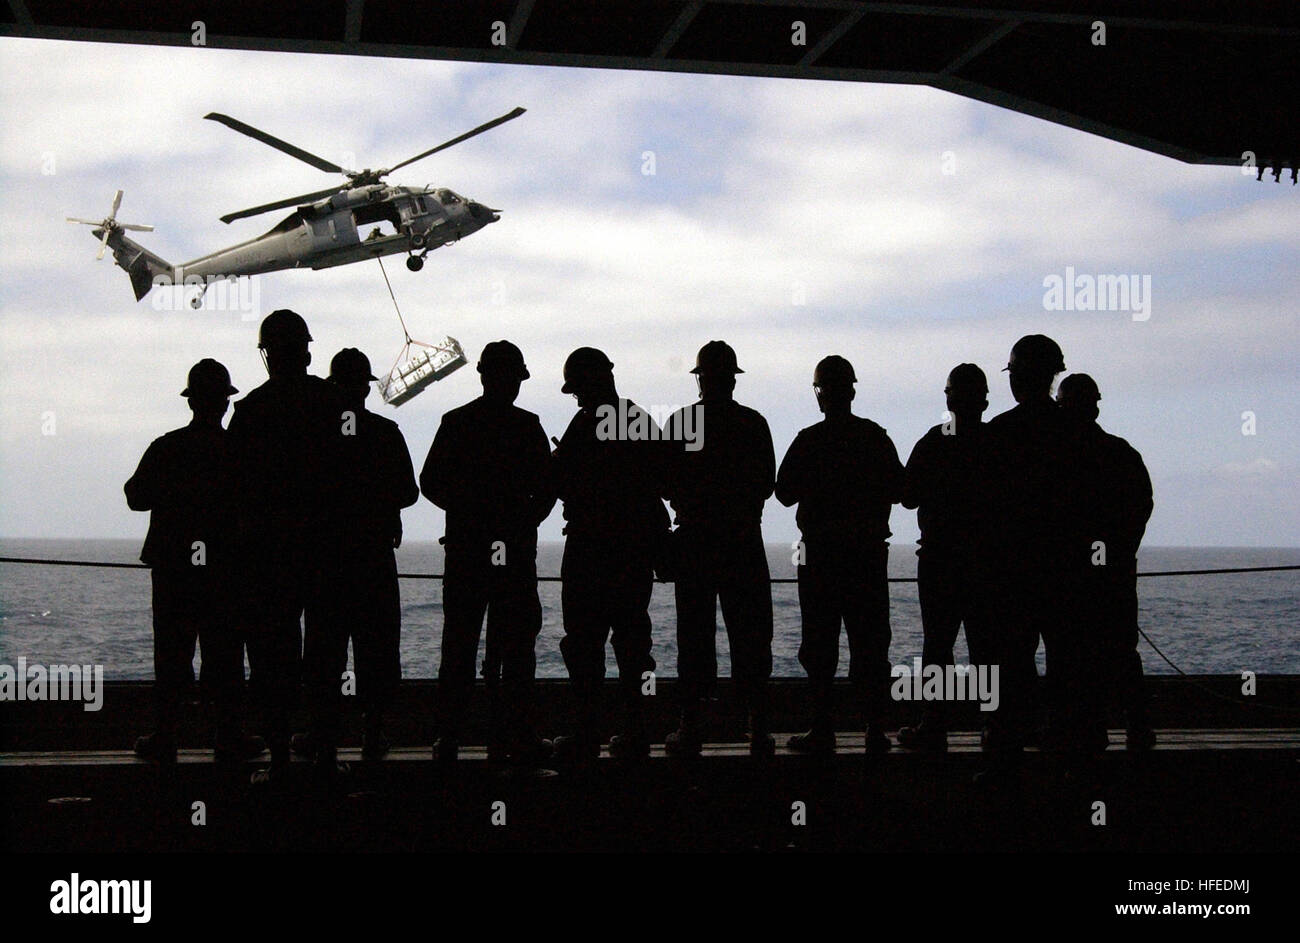 050529-N-5549O-235 Pacific Ocean (May 29, 2005) - Sailors assigned to the Deck Department aboard the Nimitz-class aircraft carrier USS Ronald Reagan (CVN 76) standby for an underway replenishment (UNREP), while an MH-60S Seahawk helicopter conducts a vertical a replenishment (VERTREP). Reagan is currently underway conducting routine carrier operations. U.S. Navy photo by Photographer's Mate 3rd Class Kevin S. O'Brien (RELEASED) US Navy 050529-N-5549O-235 Sailors assigned to the Deck Department aboard the Nimitz class aircraft carrier USS Ronald Reagan (CVN 76) standby for an underway replenish Stock Photo